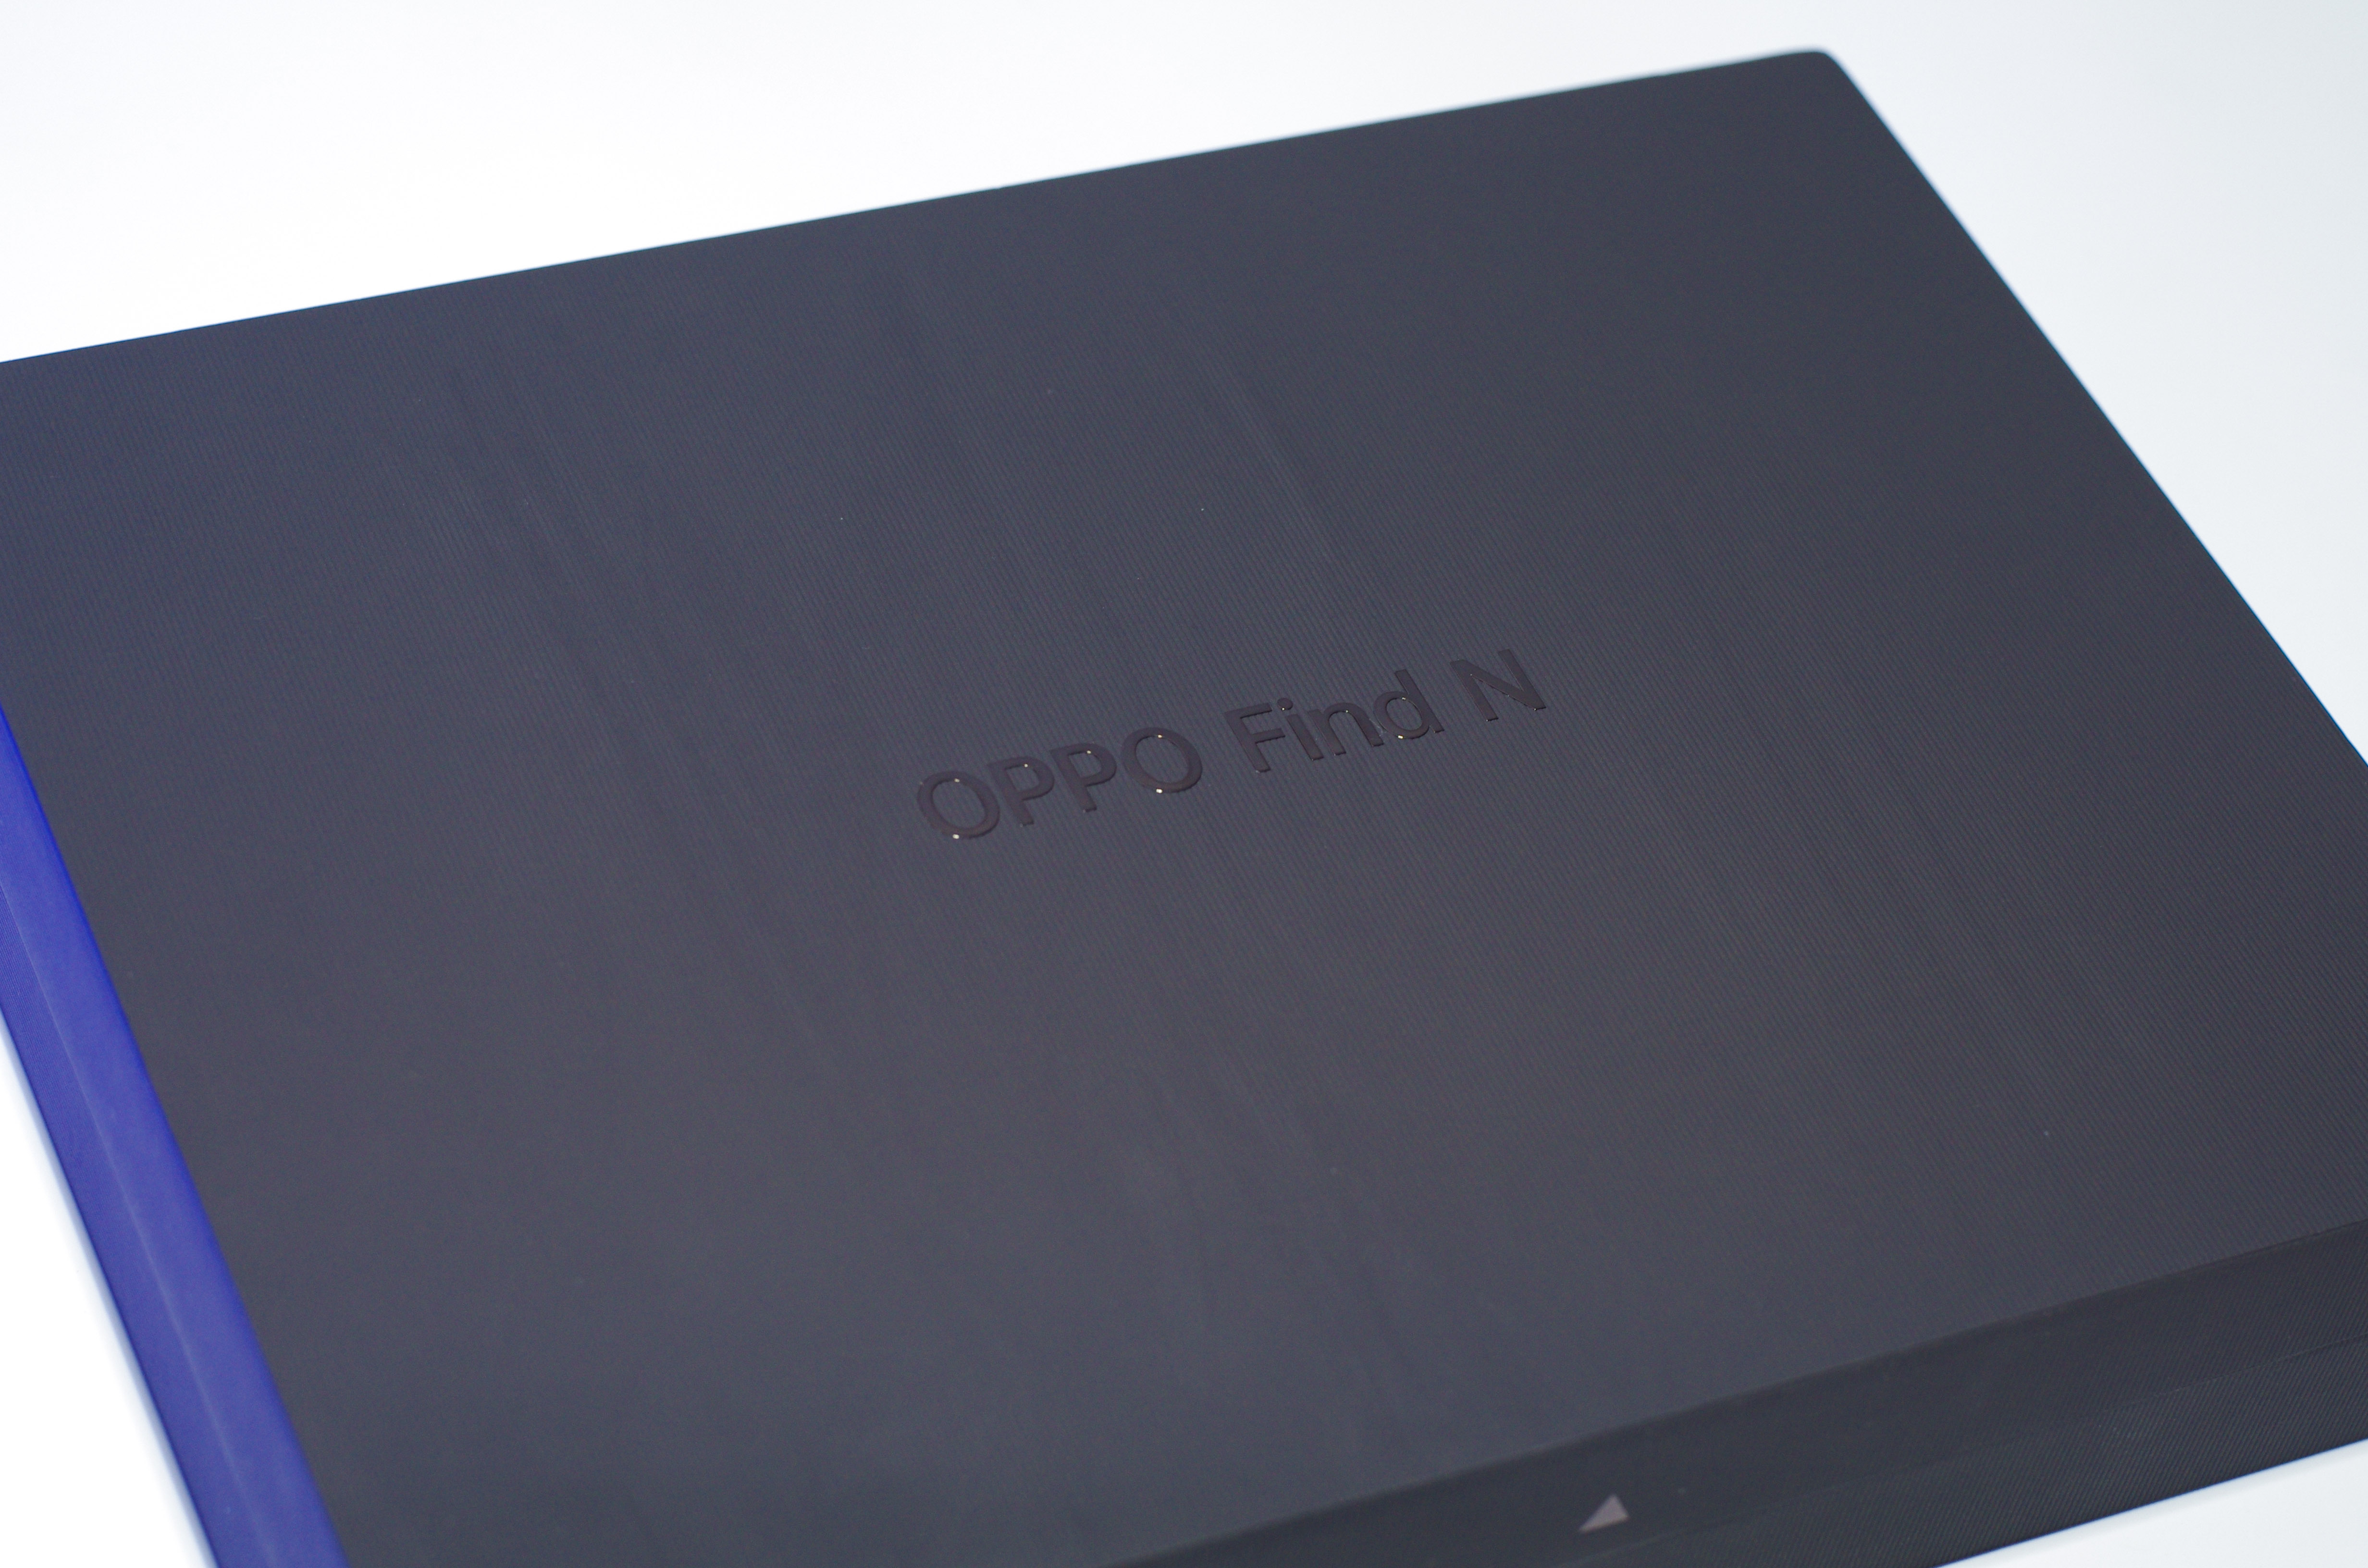 OPPO Find N first review: defining new form, unique new style